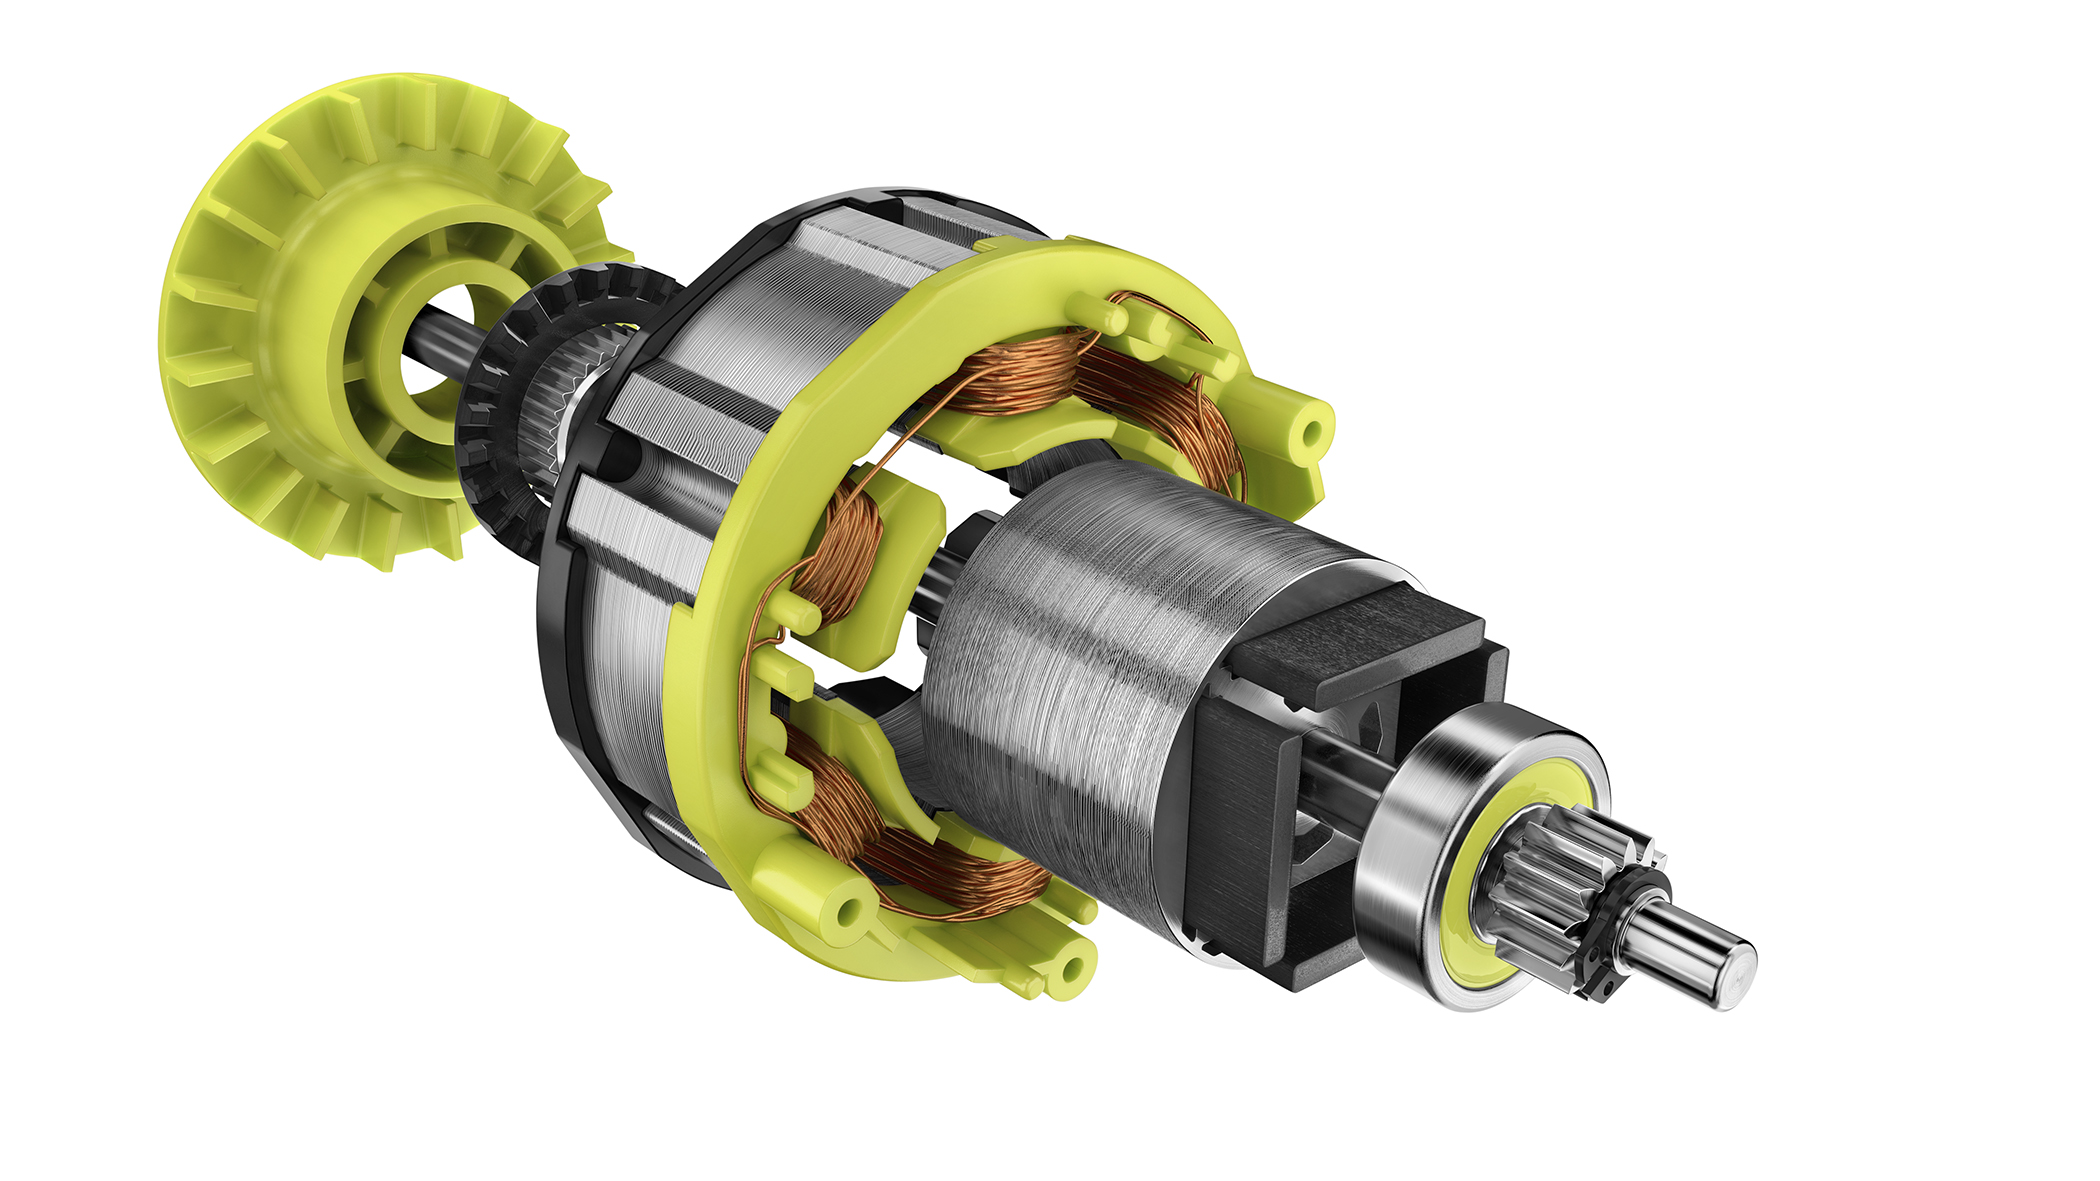 Up to 20% Faster Drilling and Up to 750 in-lbs. of Torque 